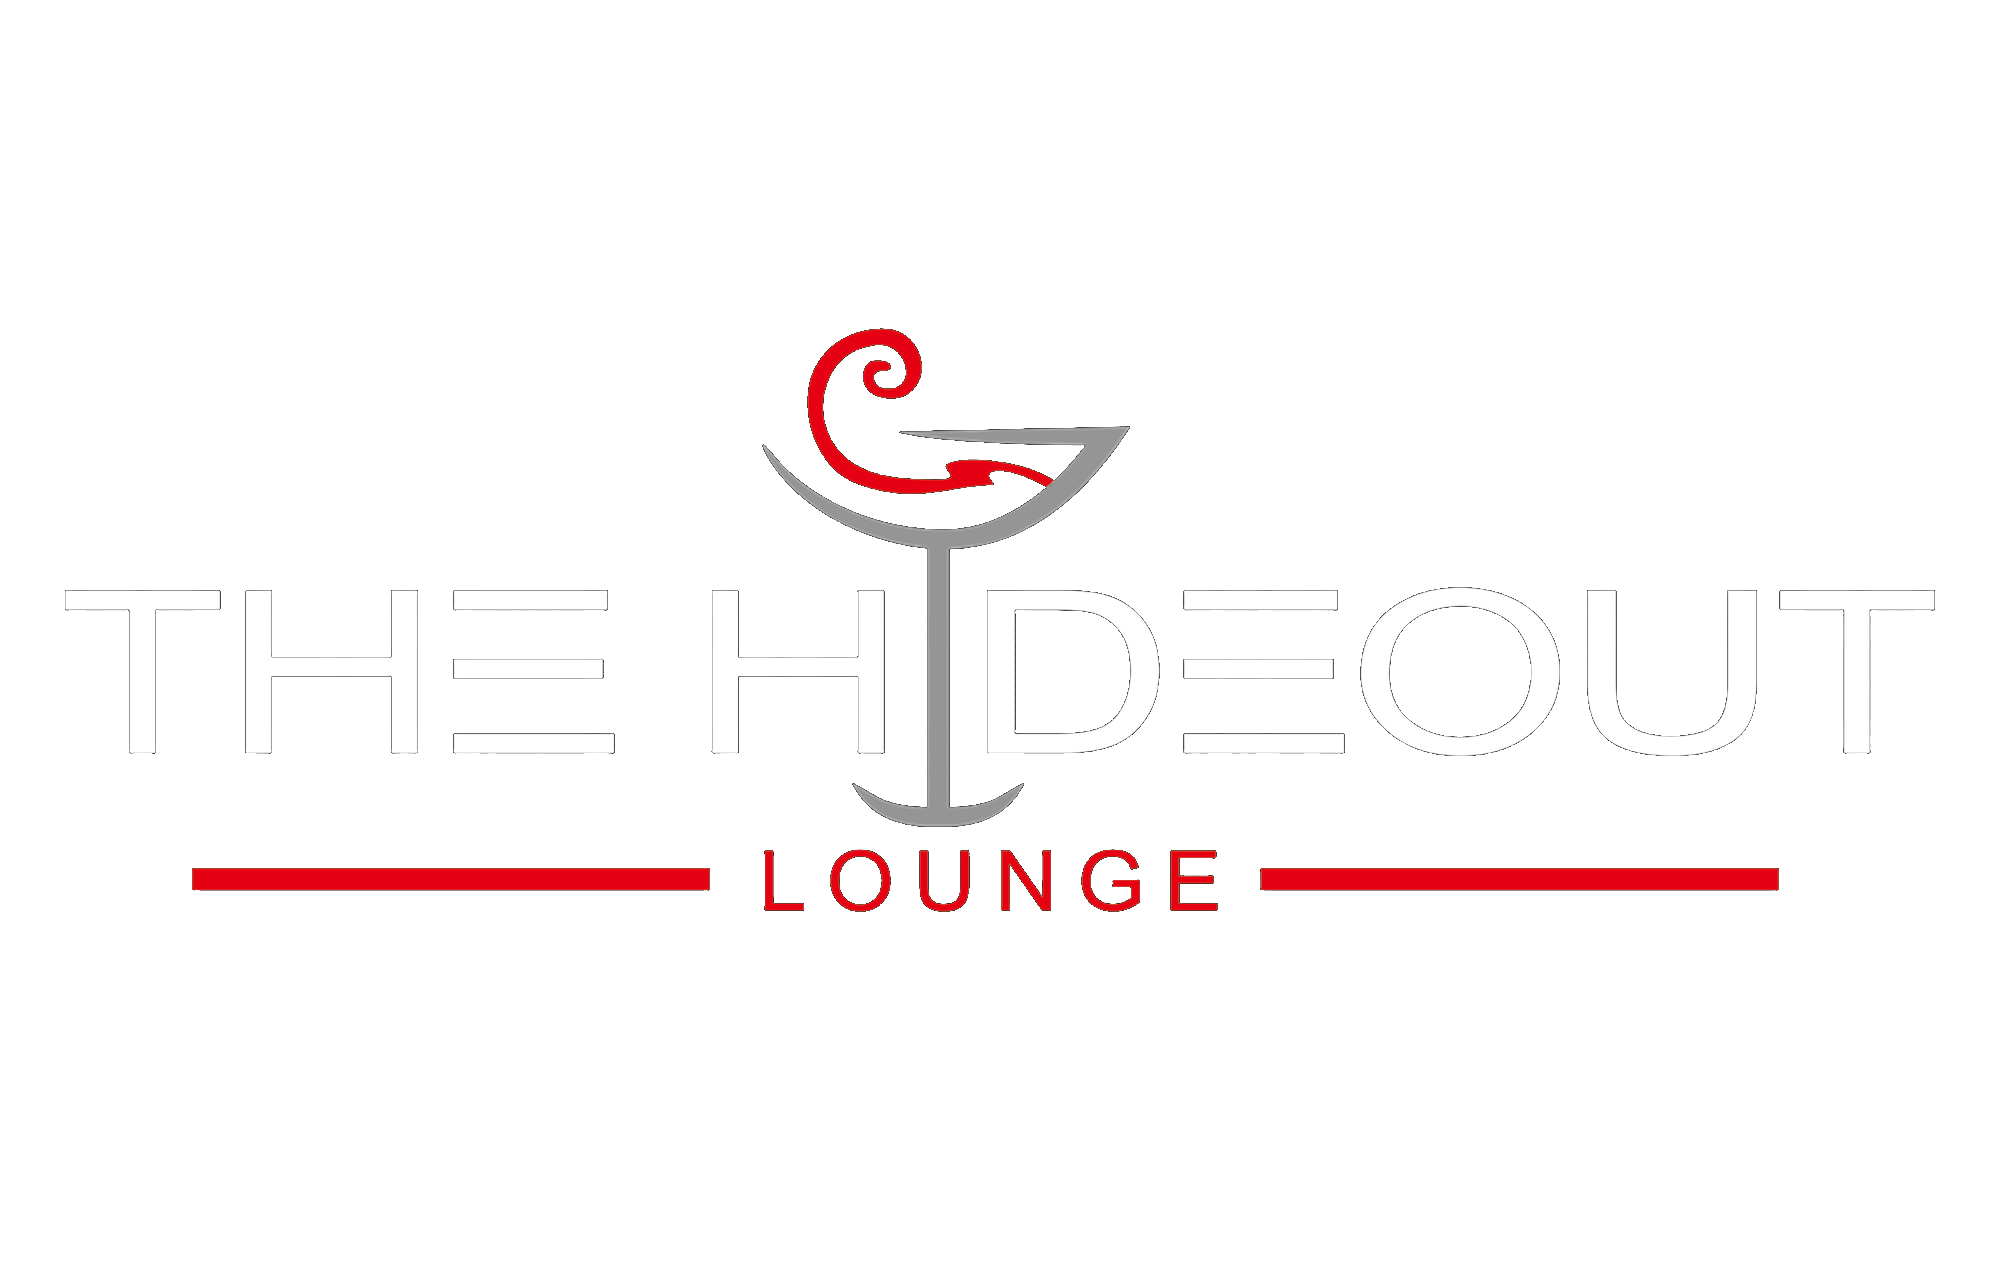 The Hideout Lounge